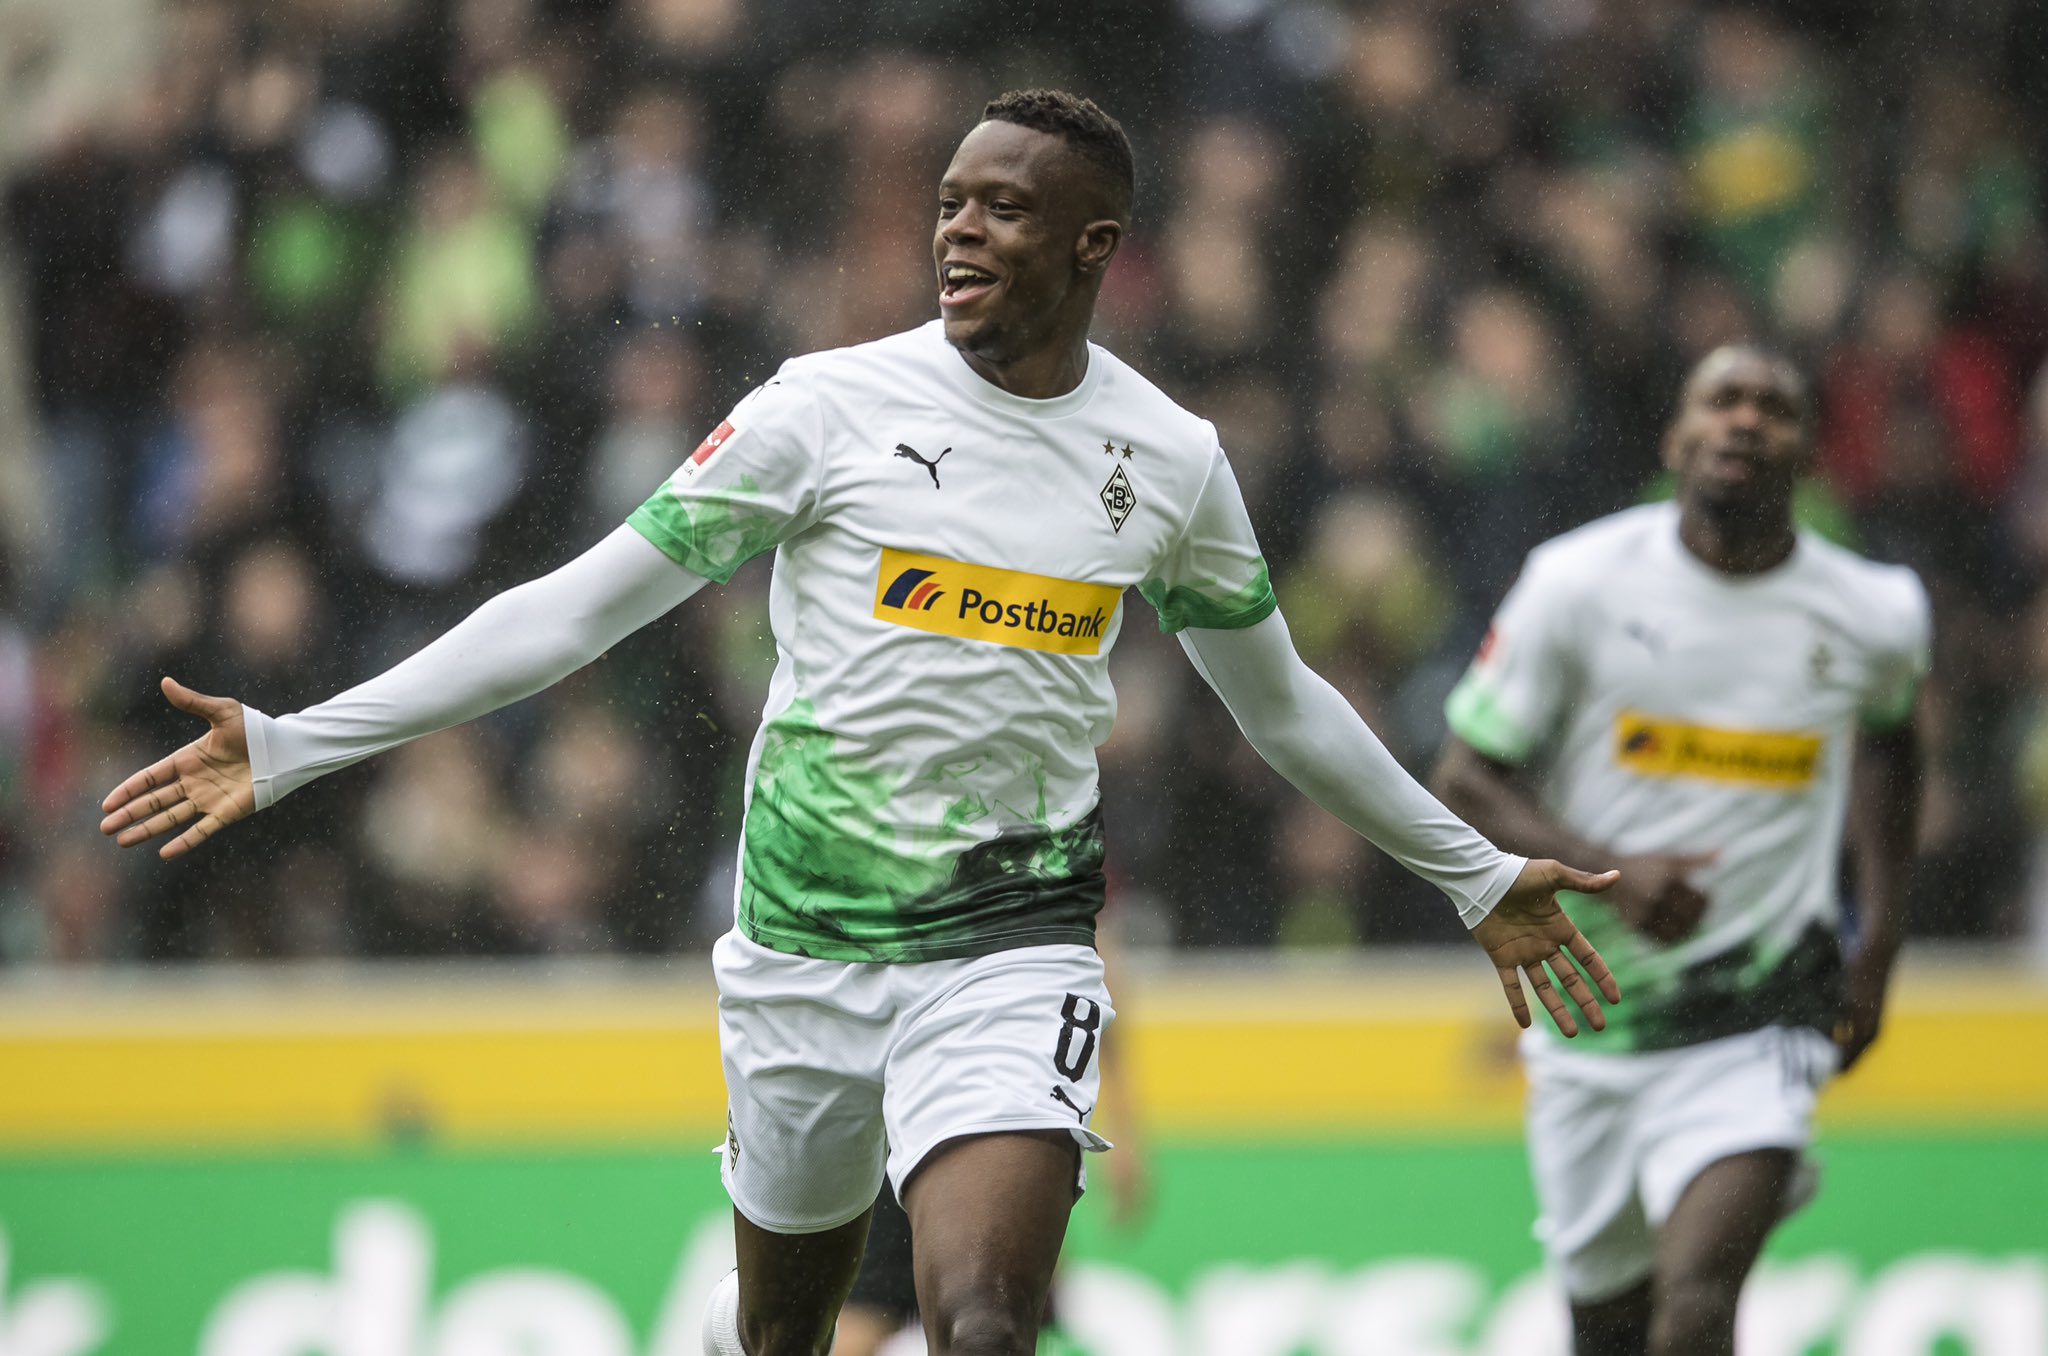 Denis Zakaria has told us clearly that he would like to leave this summer, confirms Max Eberl